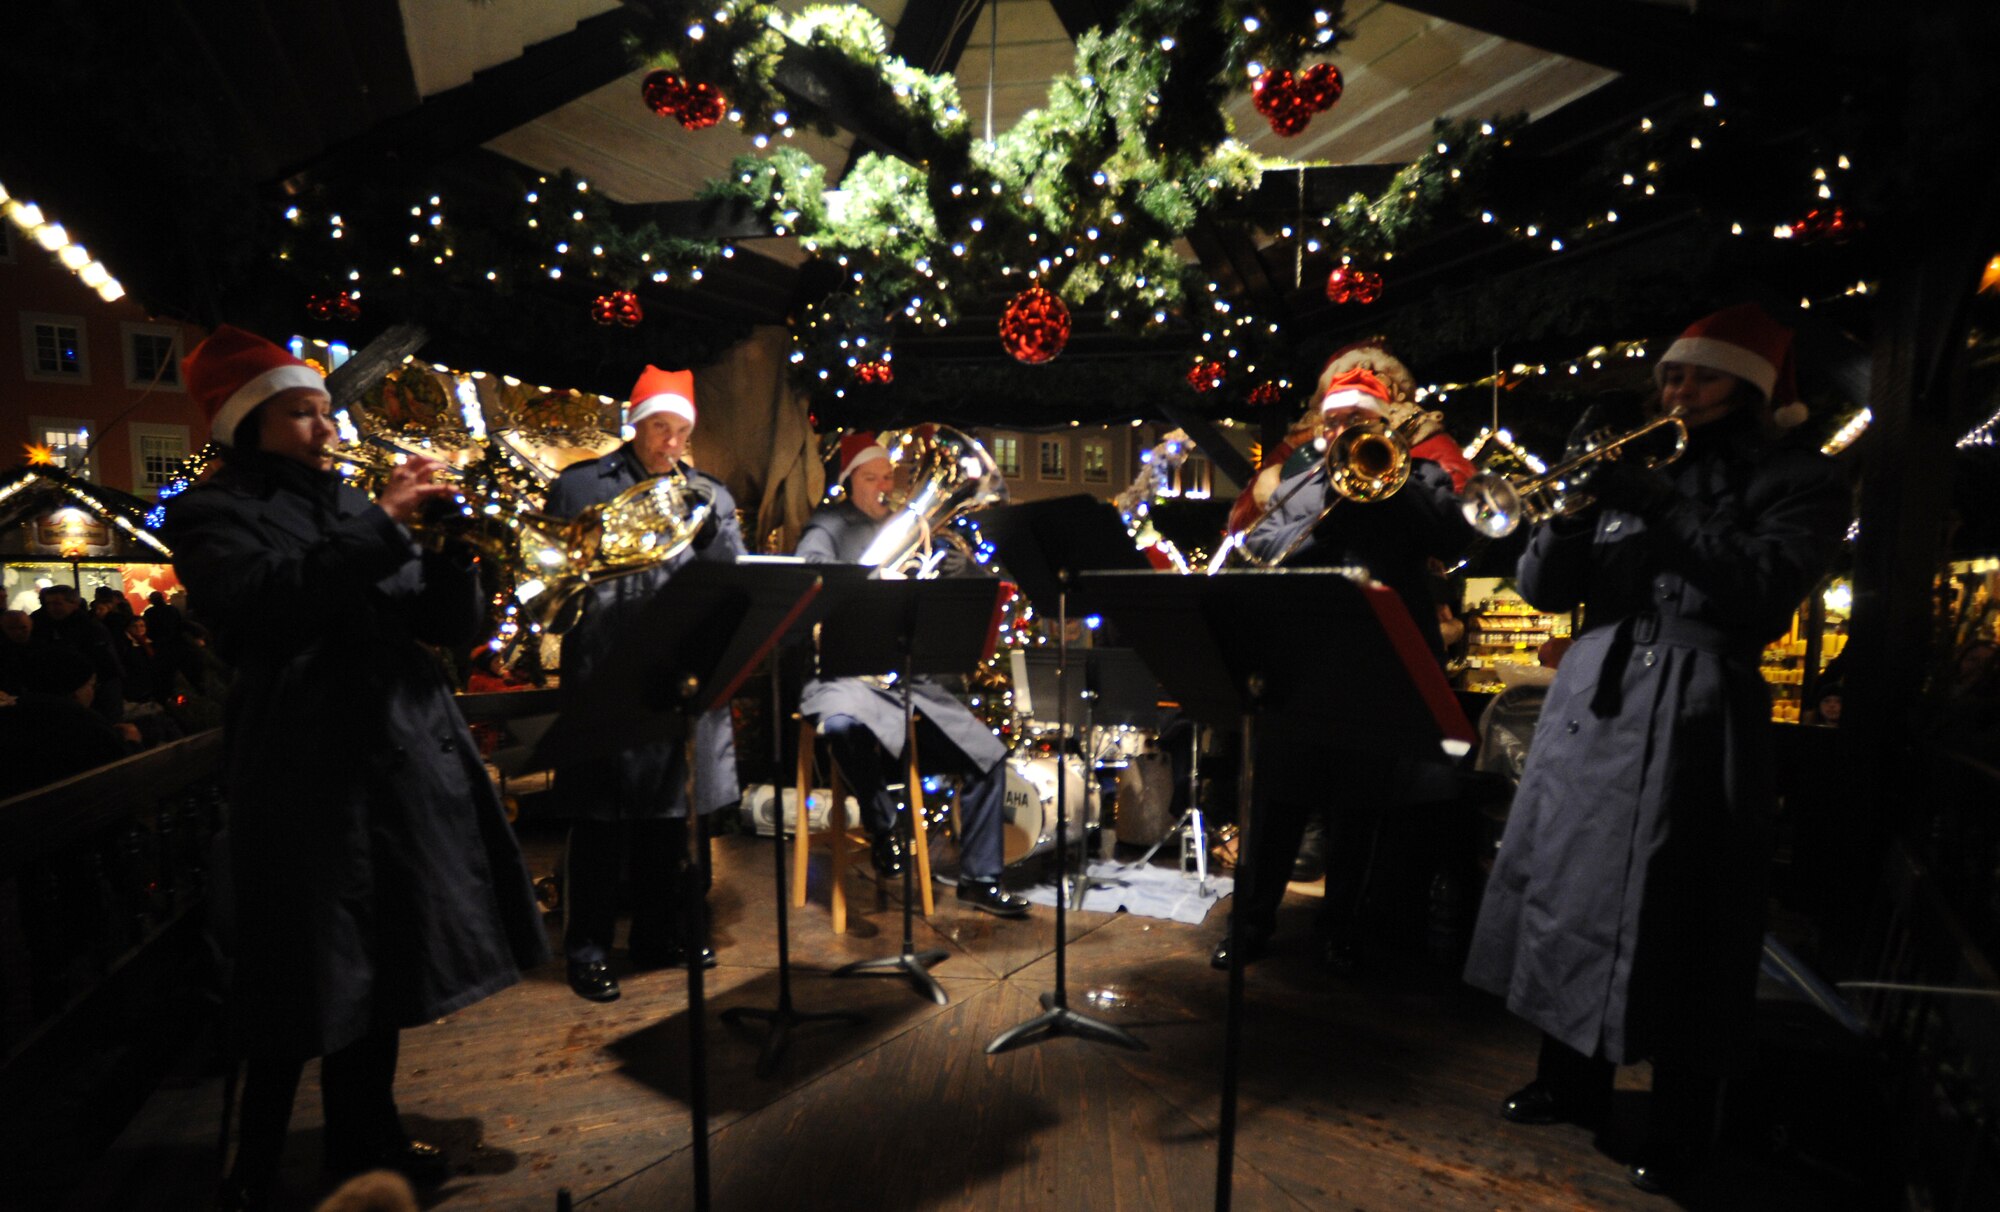 TRIER, Germany -- Members of the U.S. Air Forces in Europe Band Five Star Brass perform on the center stage Dec. 17 at the Trier Christmas Market. The band entertained crowds of all ages with holiday songs during the concert. (U.S. Air Force photo/Airman 1st Class Nathanael Callon)